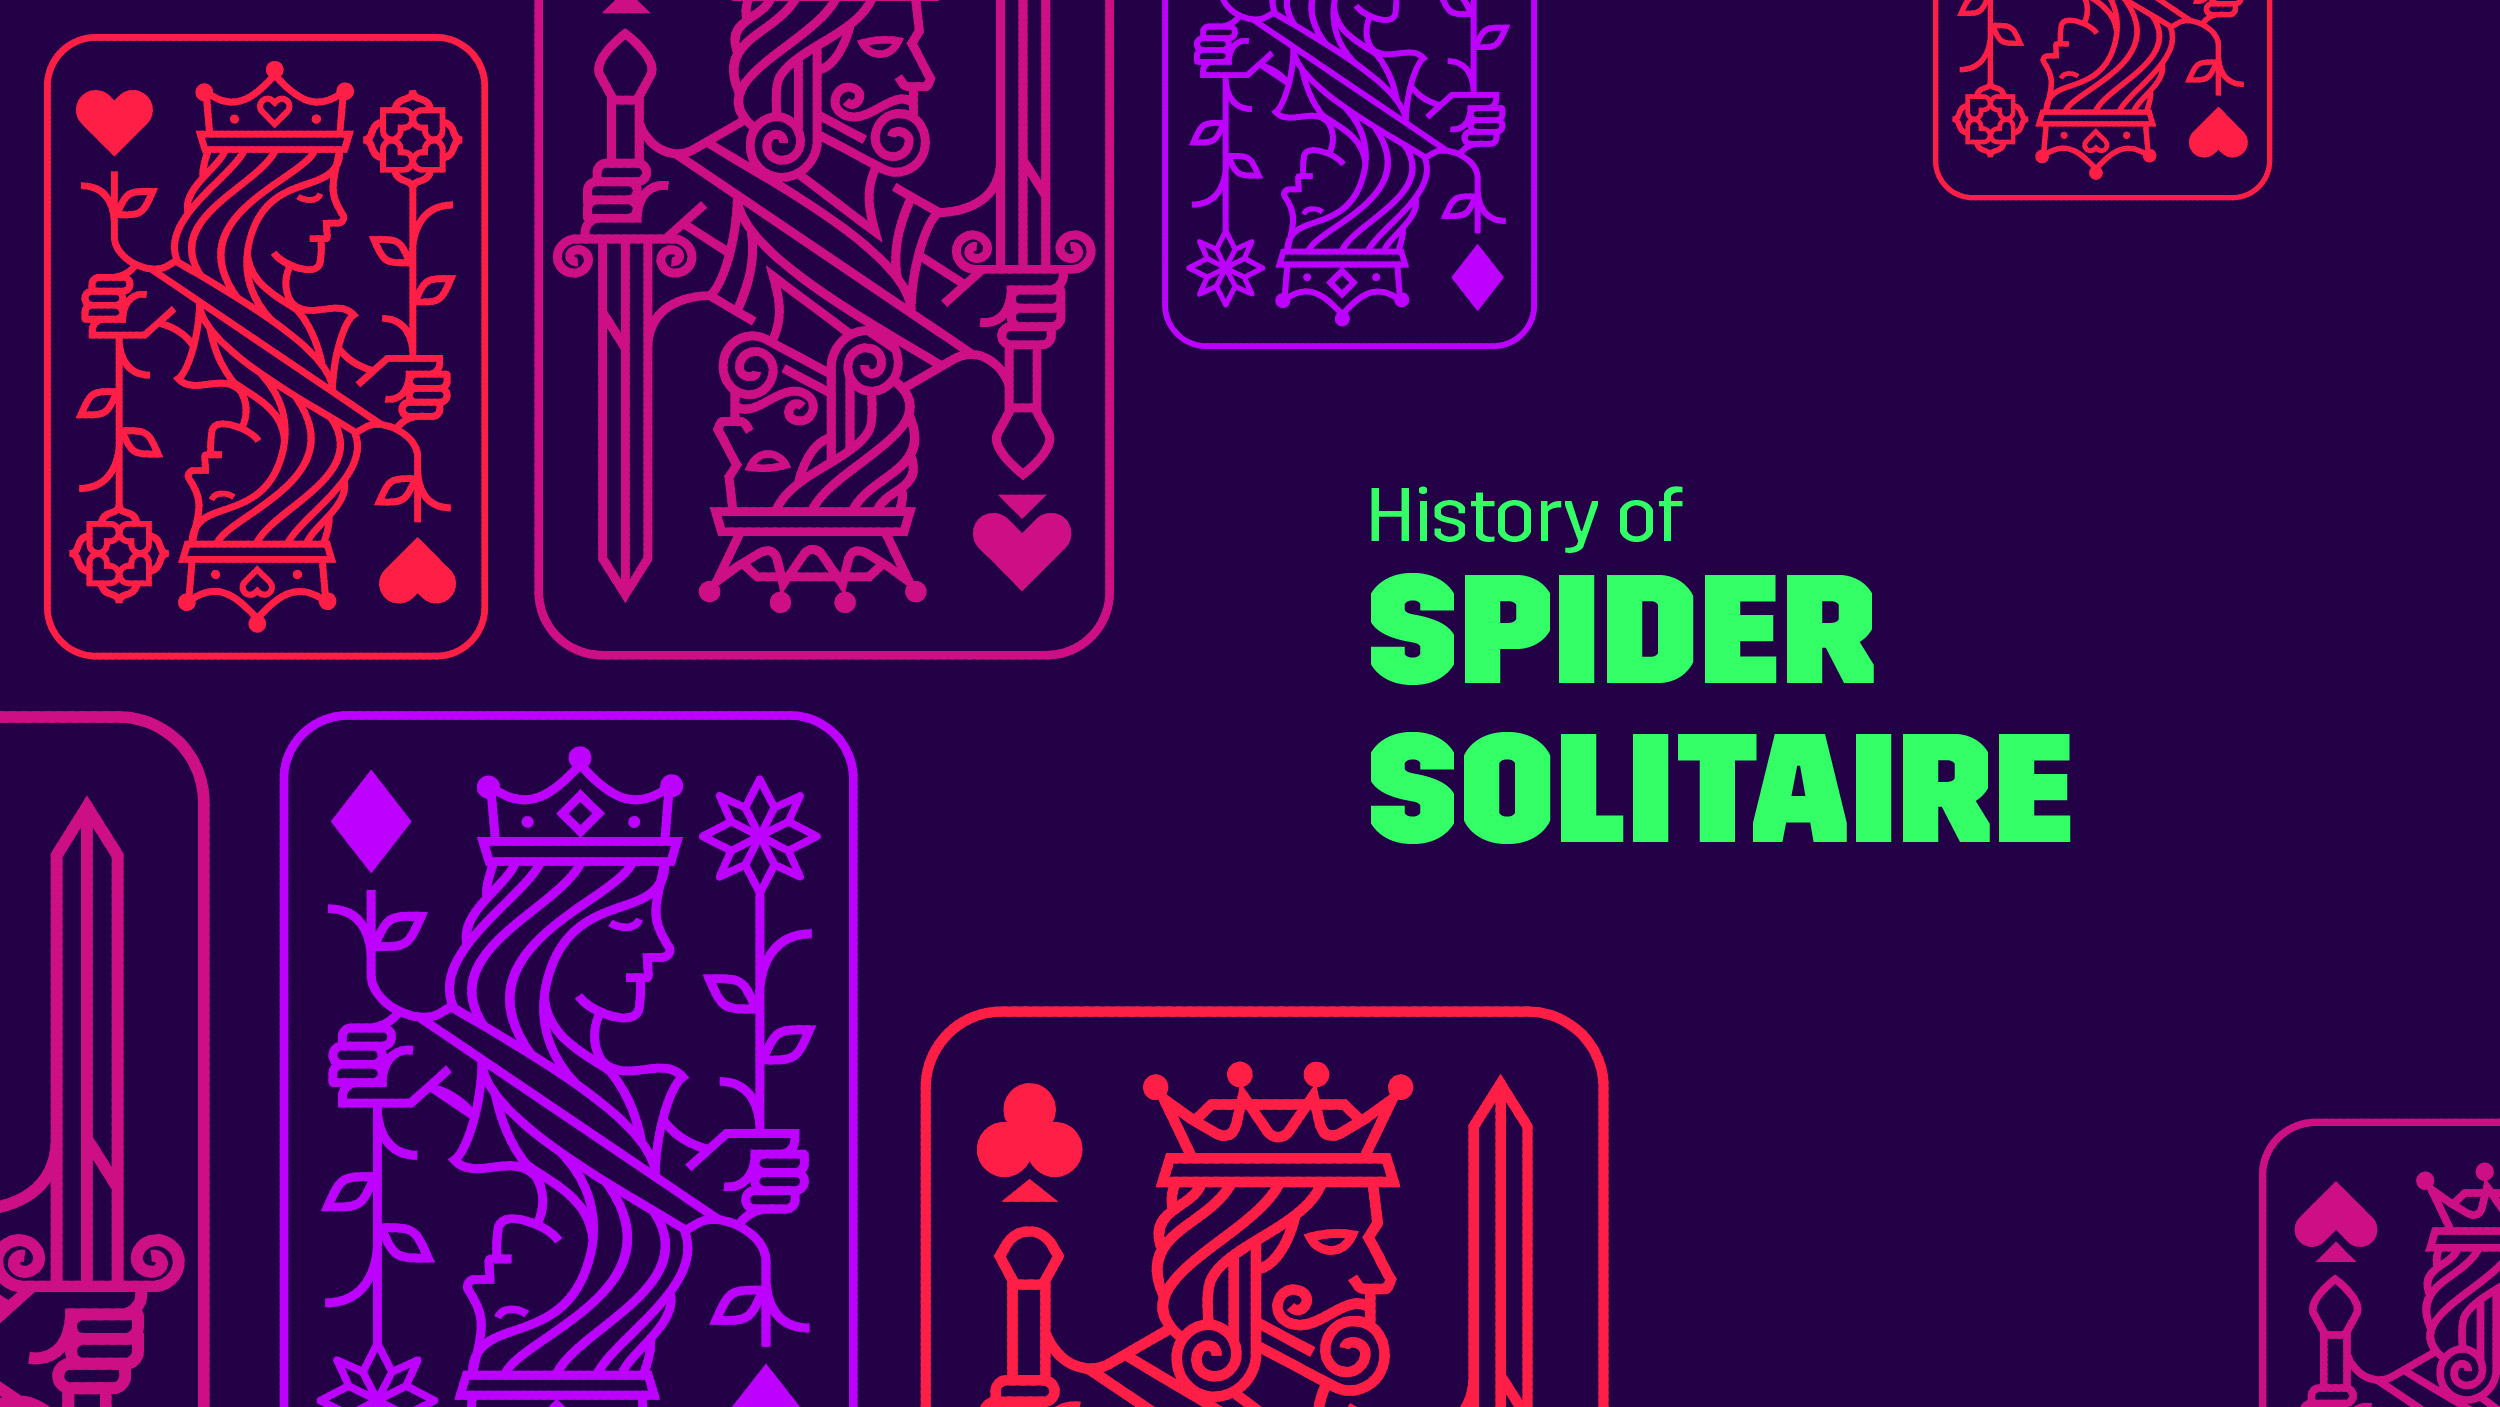 solitaire card game history